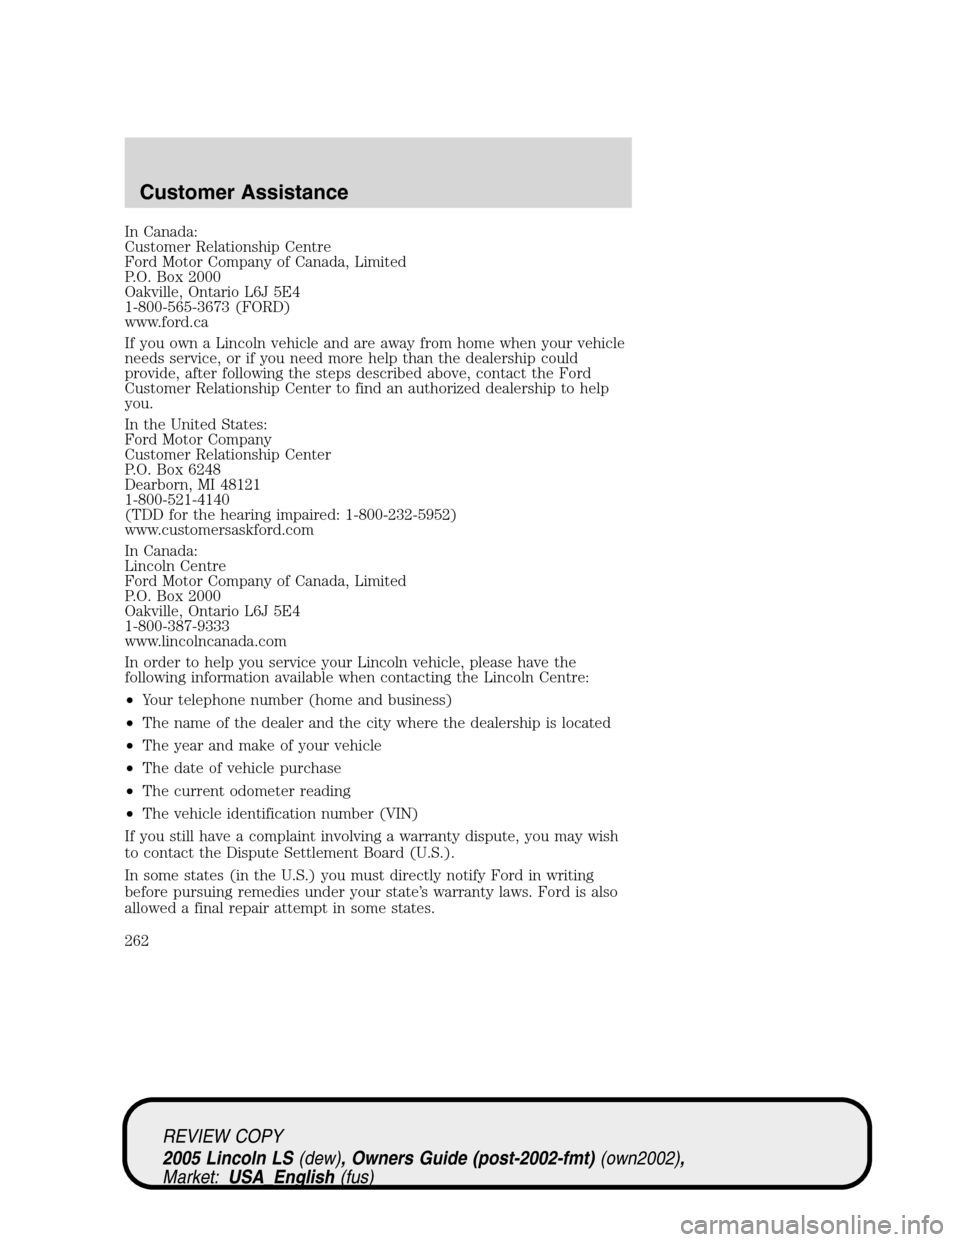 LINCOLN LS 2005  Owners Manual In Canada:
Customer Relationship Centre
Ford Motor Company of Canada, Limited
P.O. Box 2000
Oakville, Ontario L6J 5E4
1-800-565-3673 (FORD)
www.ford.ca
If you own a Lincoln vehicle and are away from h